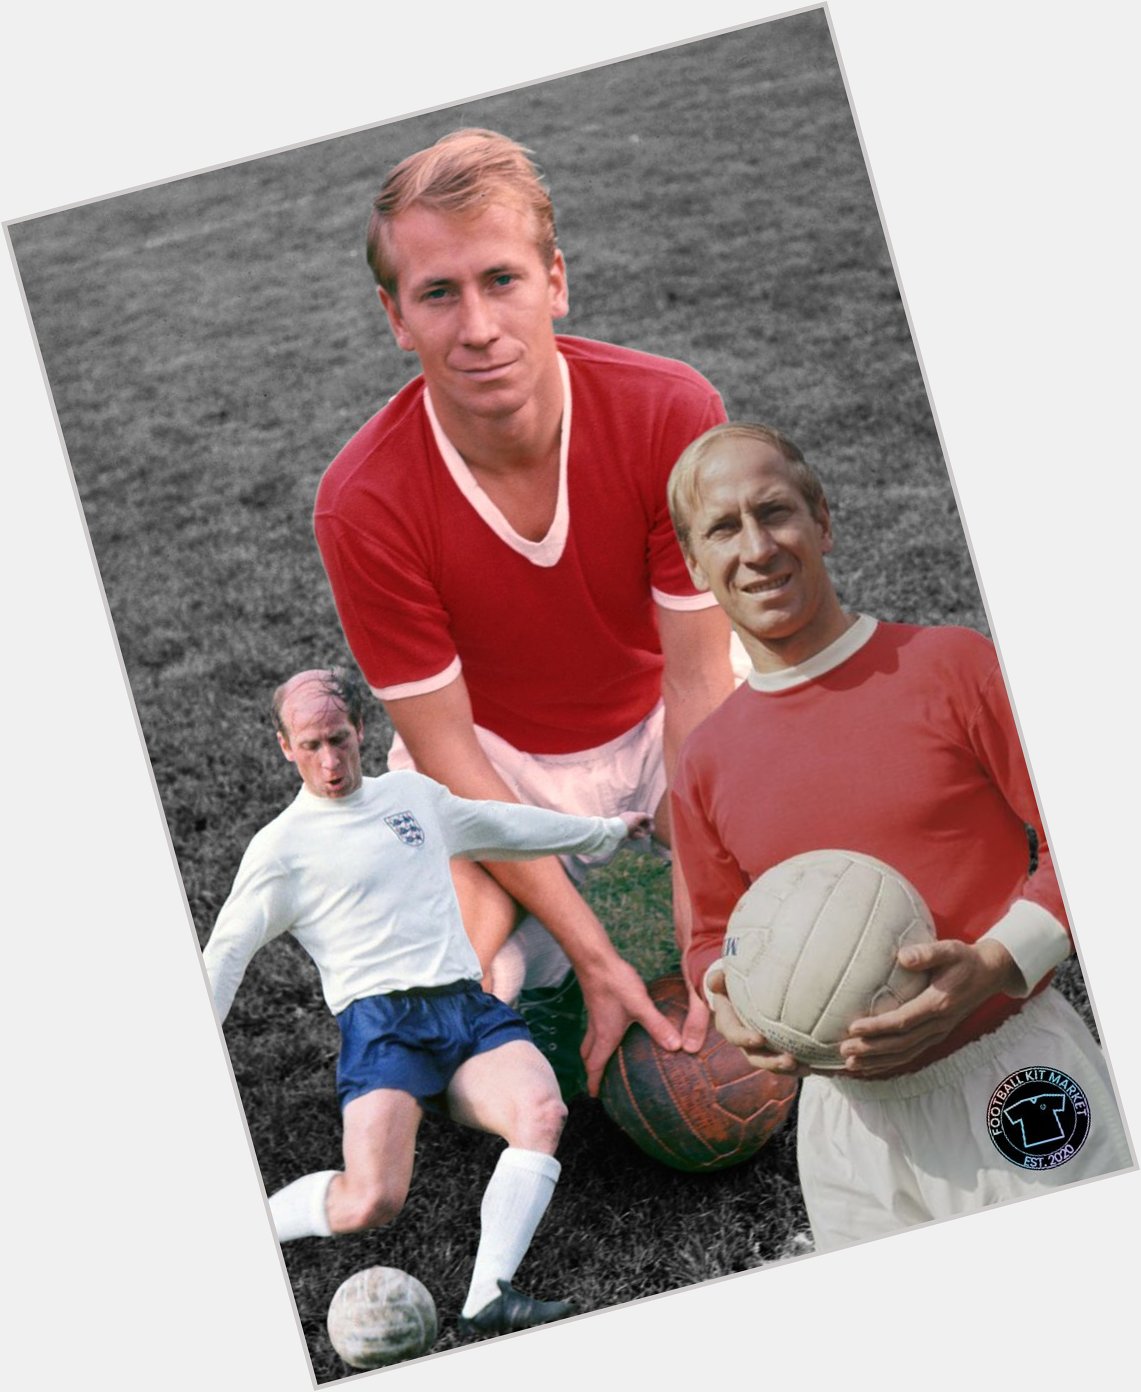 Legend, for club and country! 

Happy Birthday, Sir Bobby Charlton  